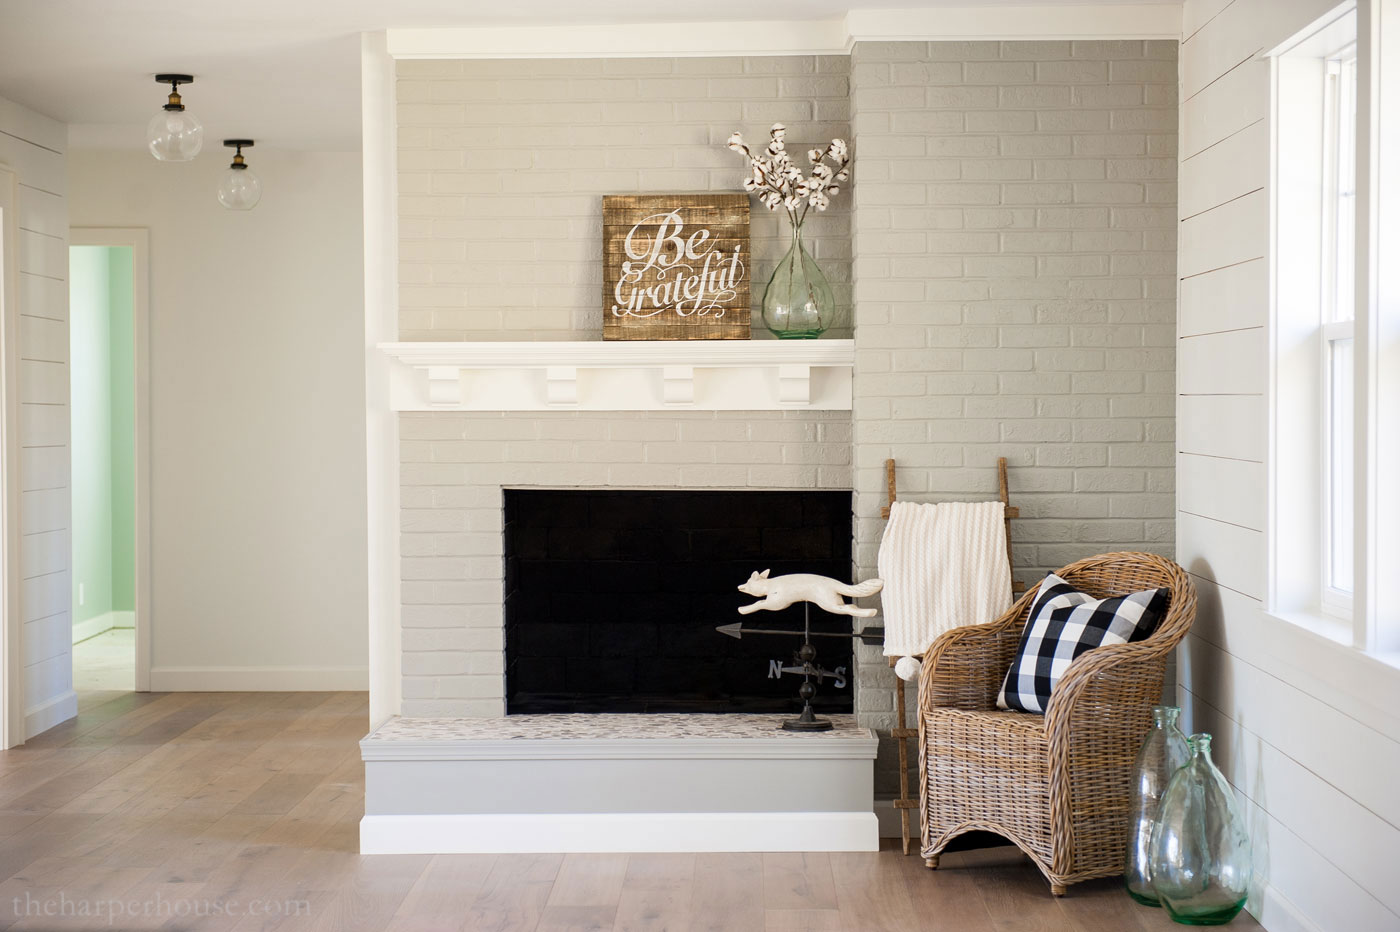 painted brick fireplace makeover reveal